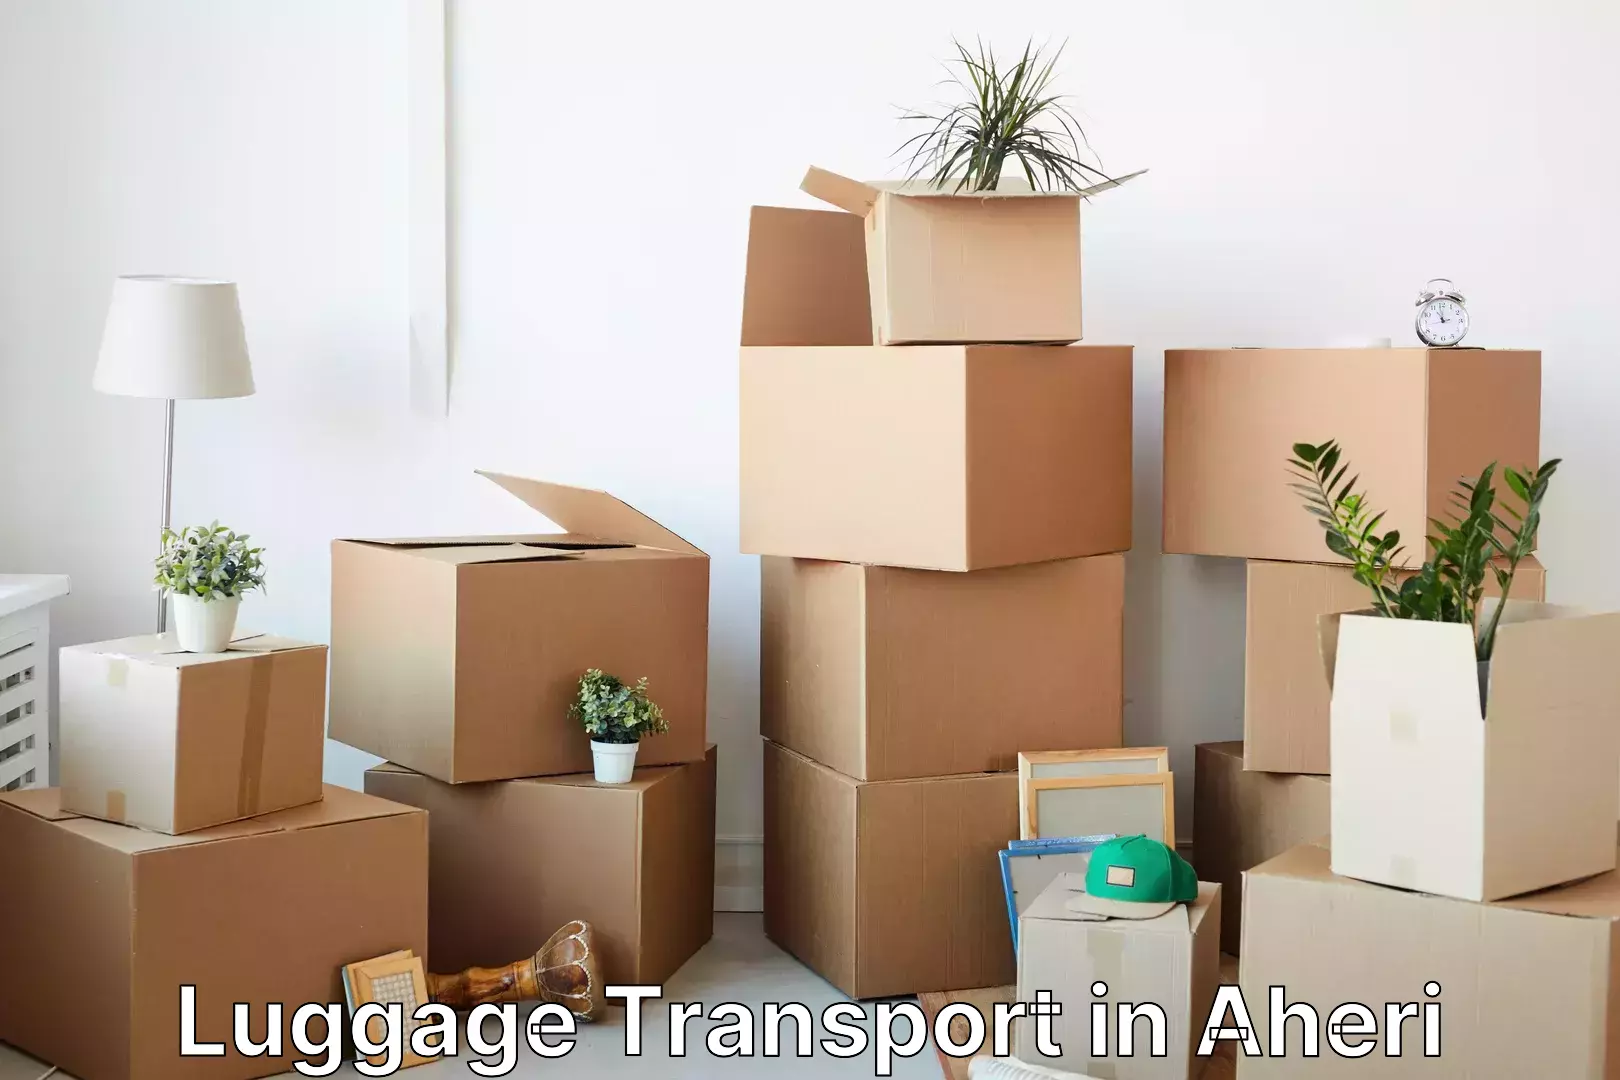 Business luggage transport in Aheri